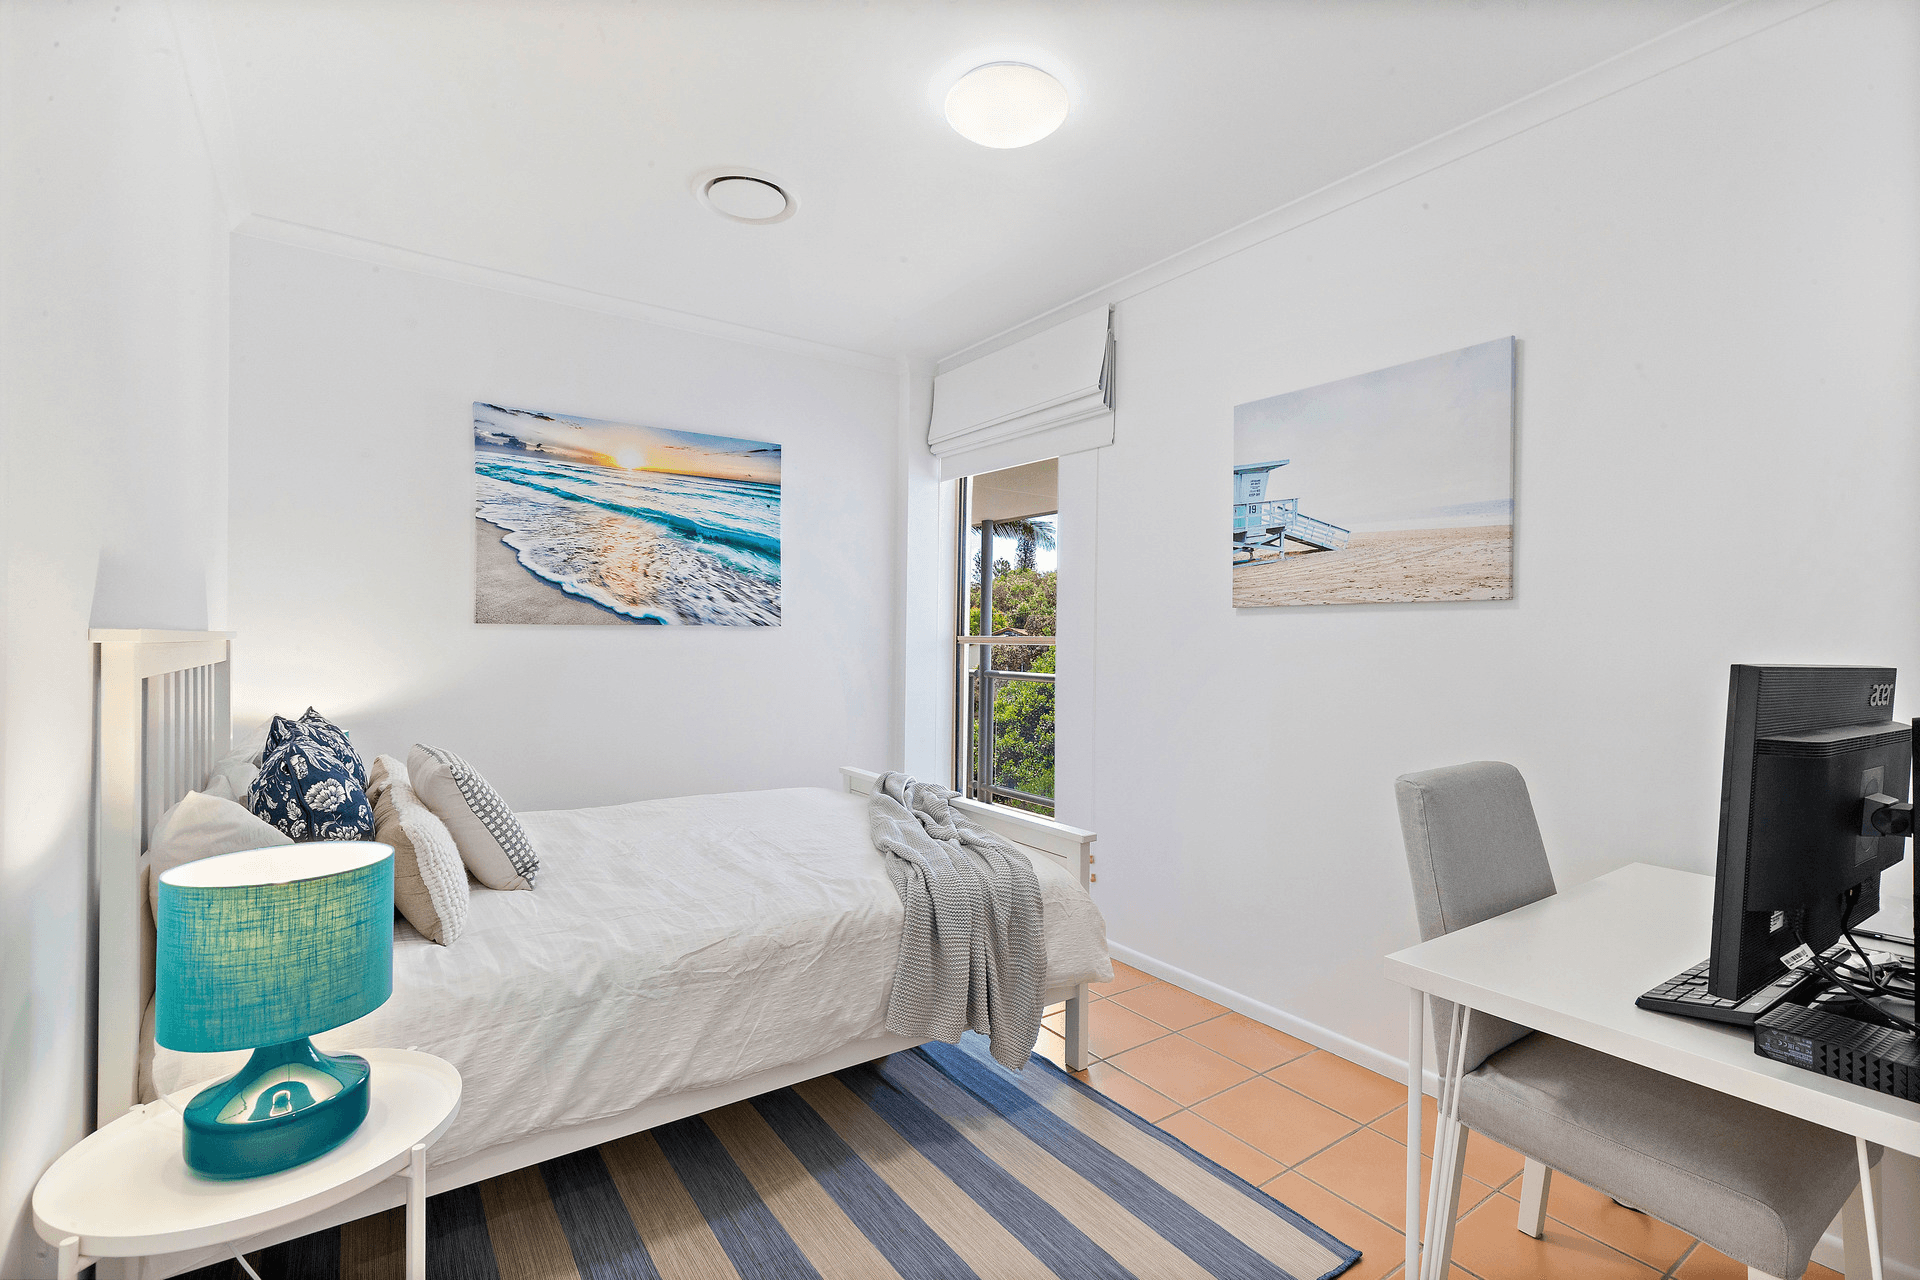 10/15 Andrew Street, Point Arkwright, QLD 4573